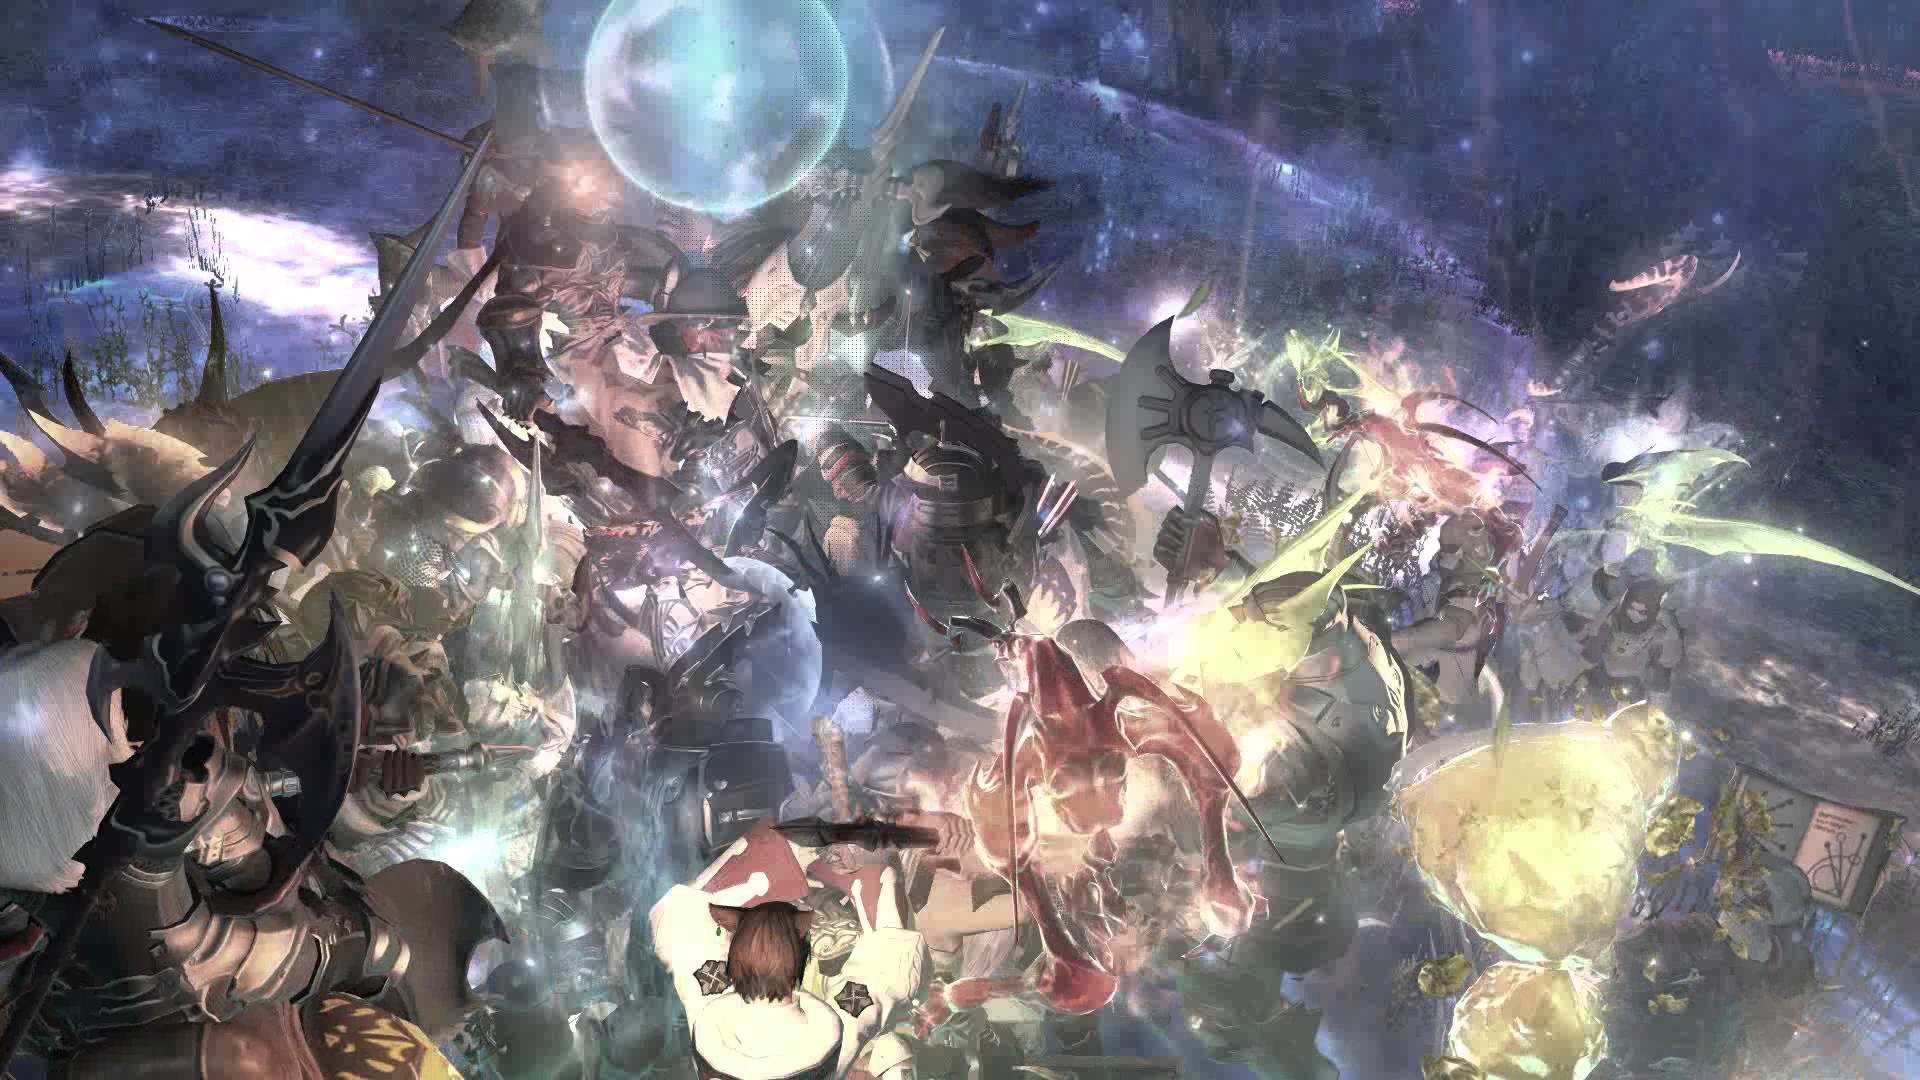 1920x1080 Displaying 18> Images For - Ffxiv Wallpaper 1080p.